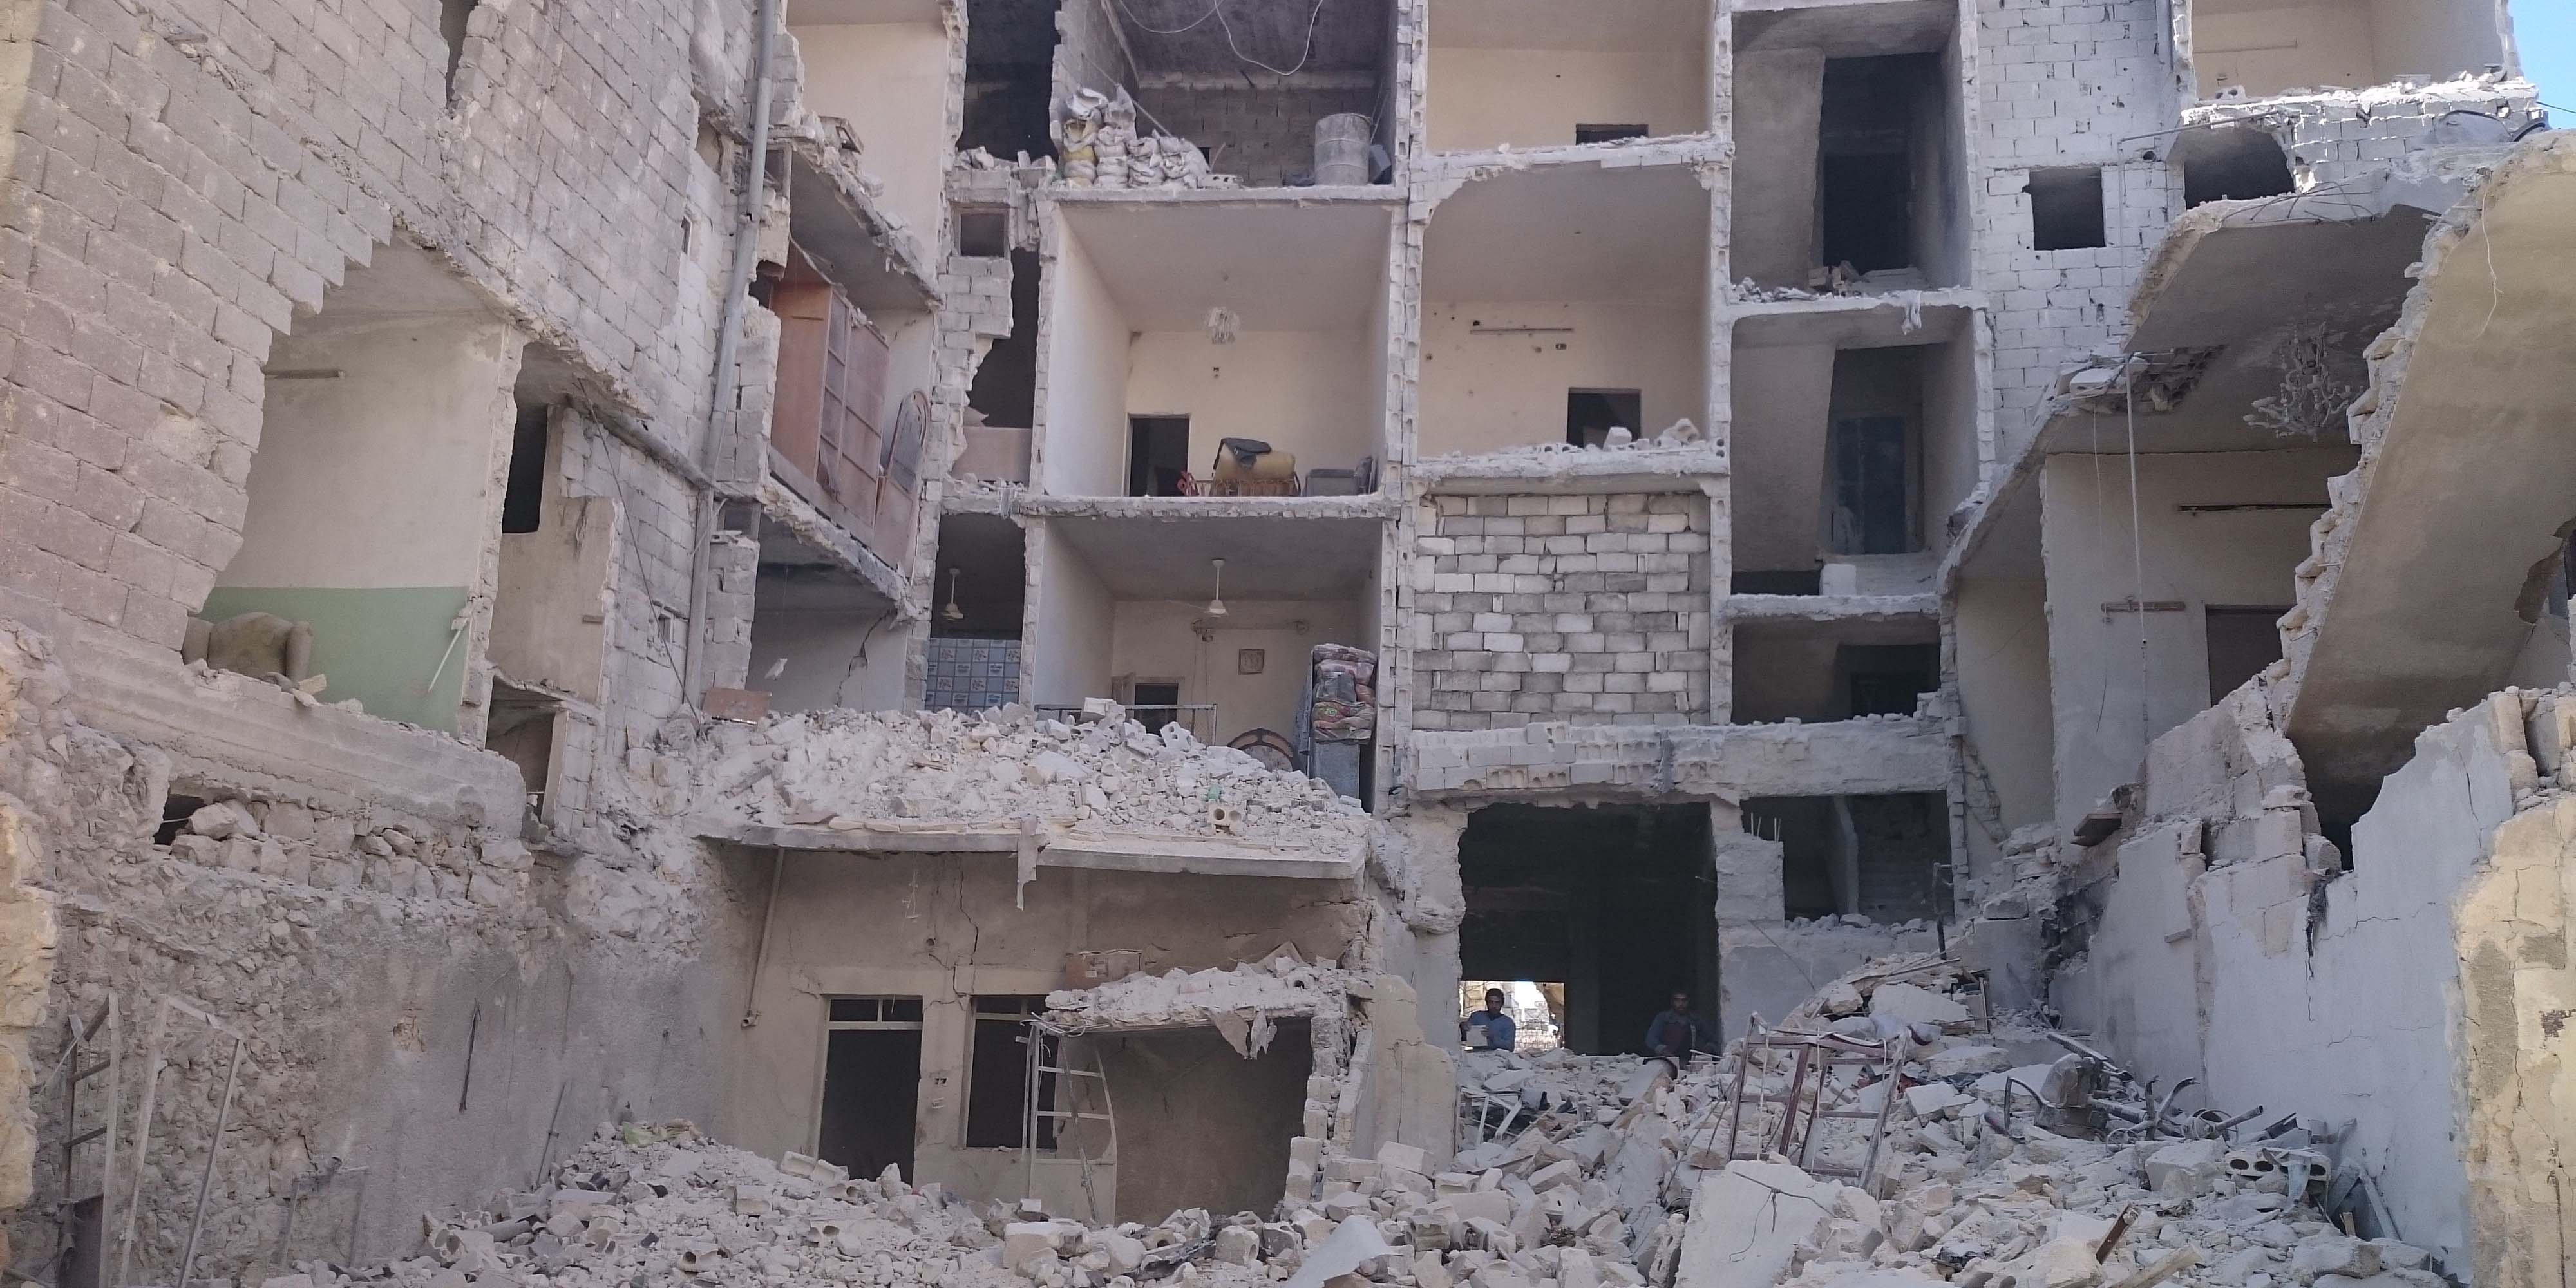 A building in Syria has been destroyed.